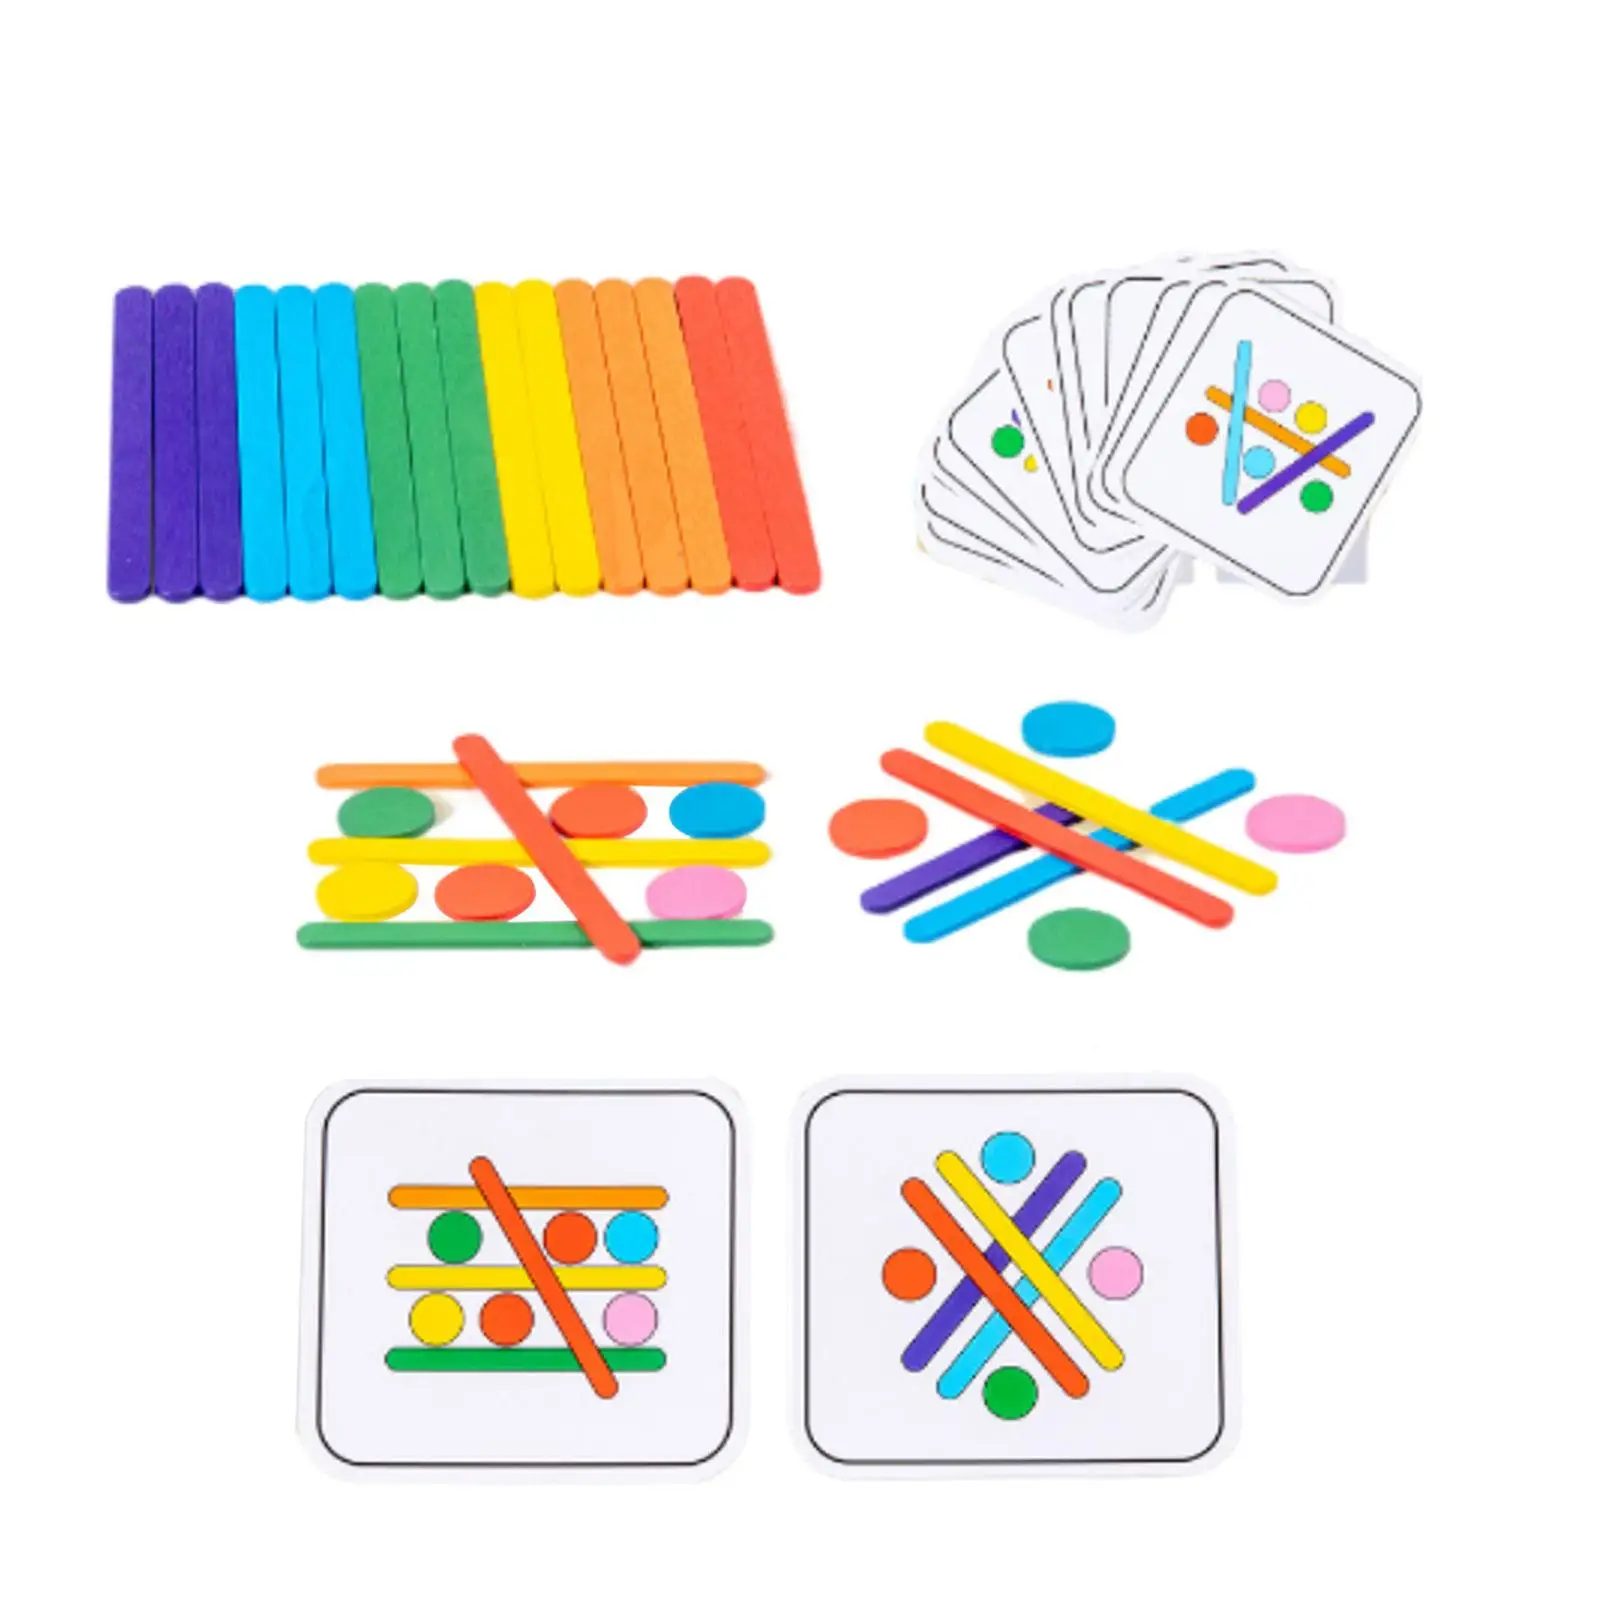 

Wooden Sticks Jigsaw Puzzle Logical Thinking Matching Games Children Early Learning Montessori Toys for Parties Preschool